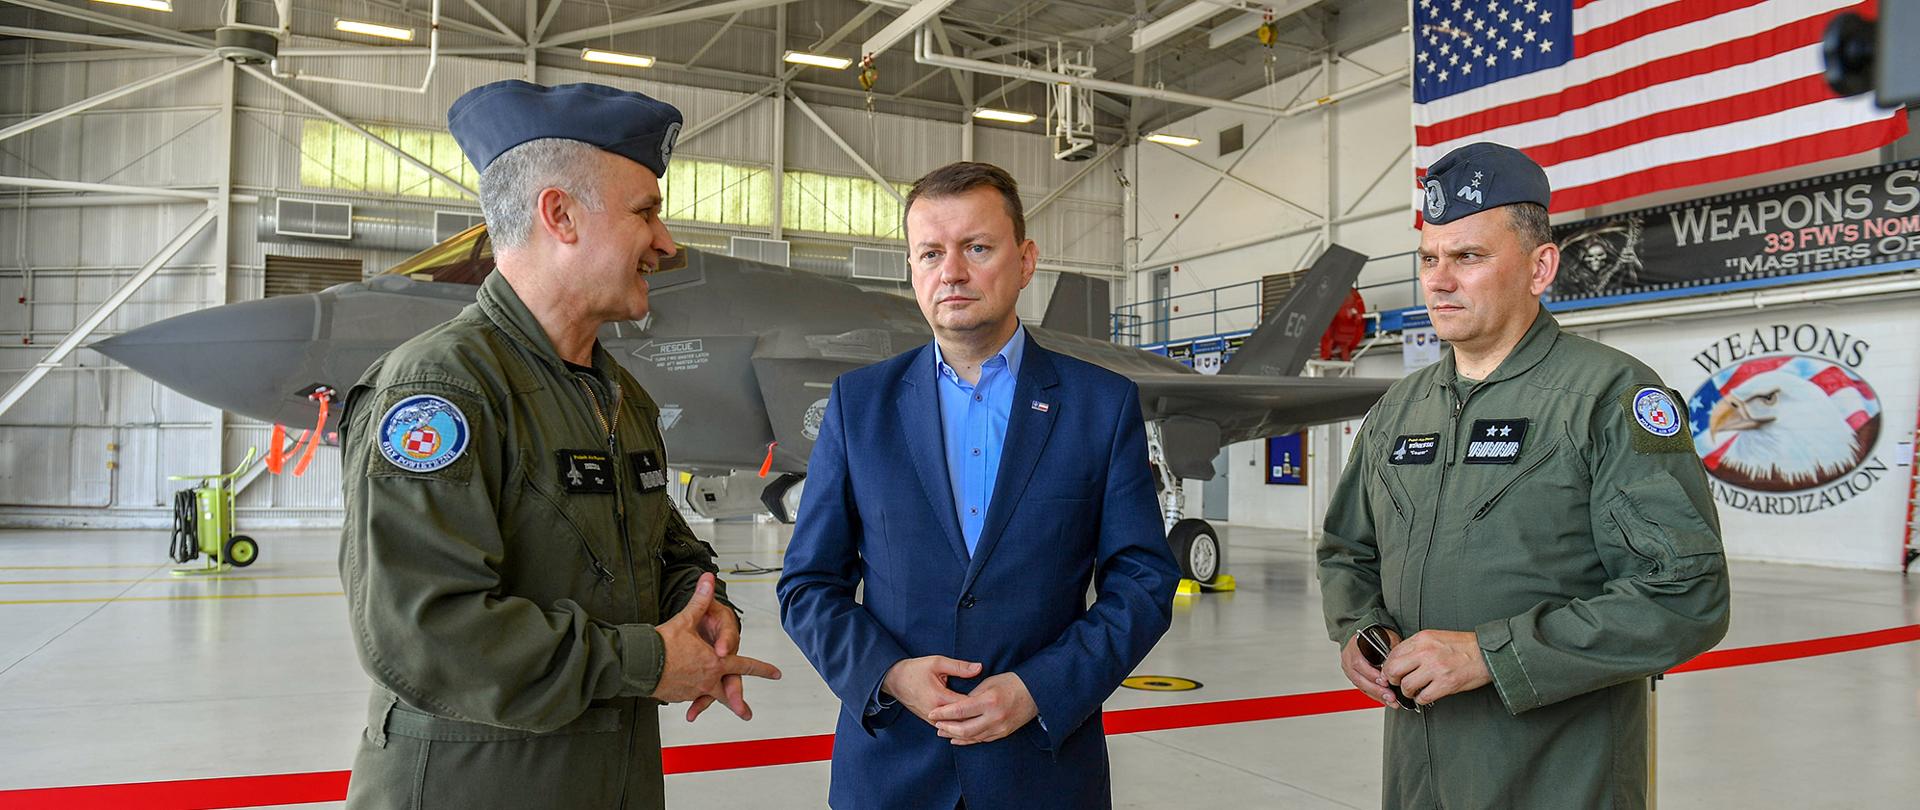 On June 10, the head of the Ministry of National Defence began his visit to the USA and visited the Eglin Air Force Base, where, among others he became acquainted with the F-35 development program - the latest - 5th generation aircraft.